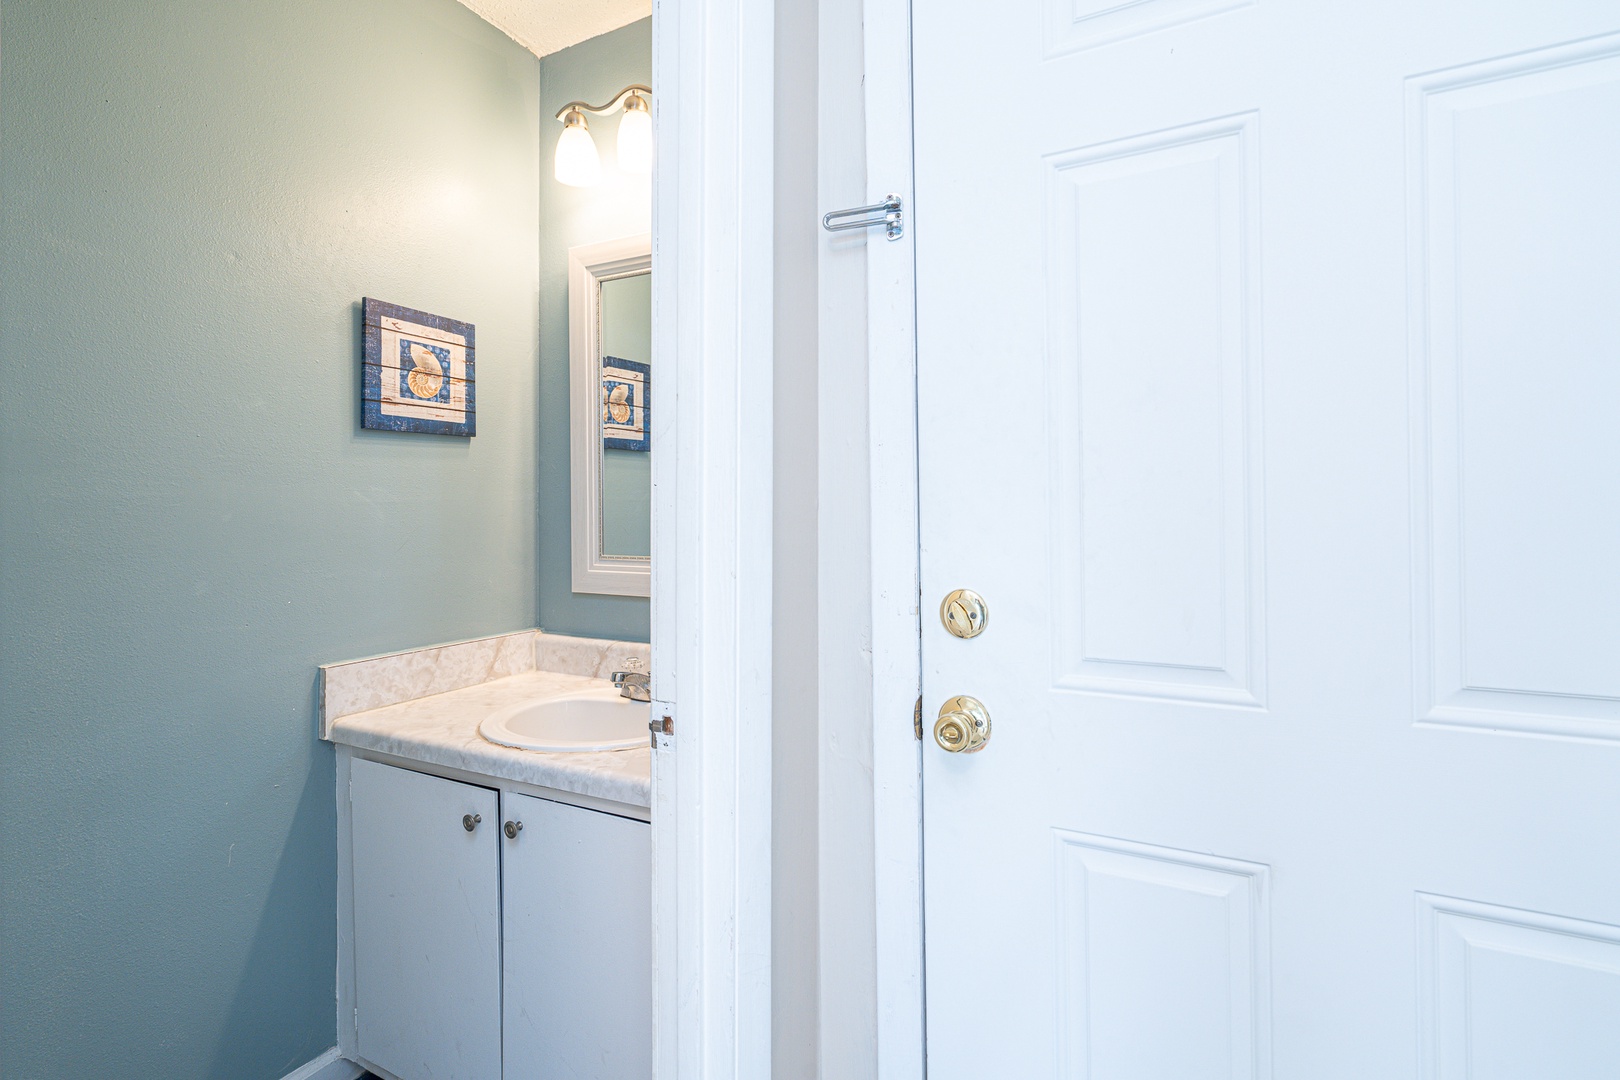 A convenient half bath is available just off the entryway